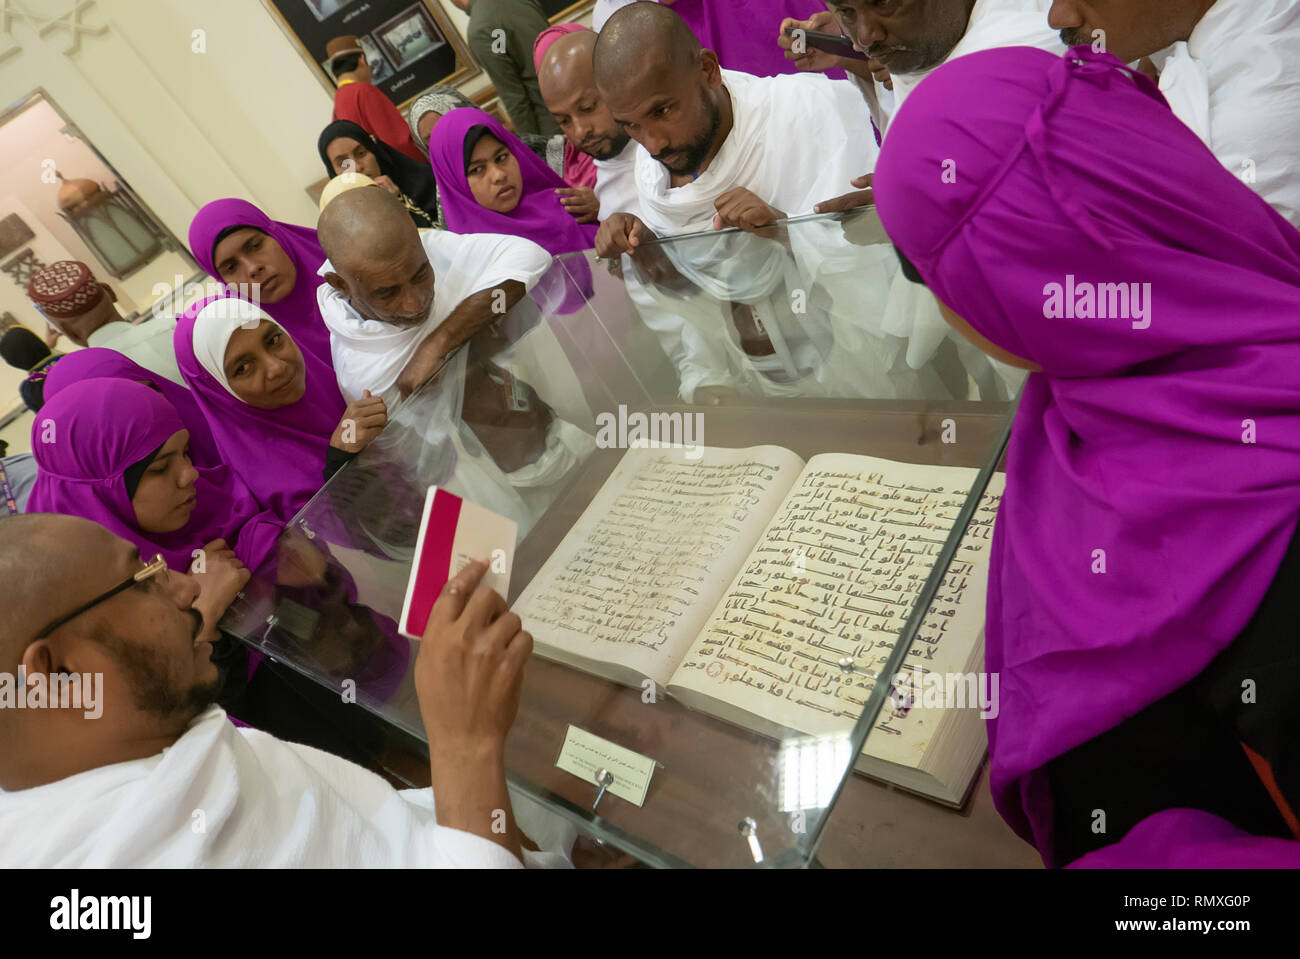 MEDINA, SAUDI ARABIA-CIRCA 2016 : A group of Muslim pilgrims from India listen to their leader explains the early version of Quran in a museum. Stock Photo